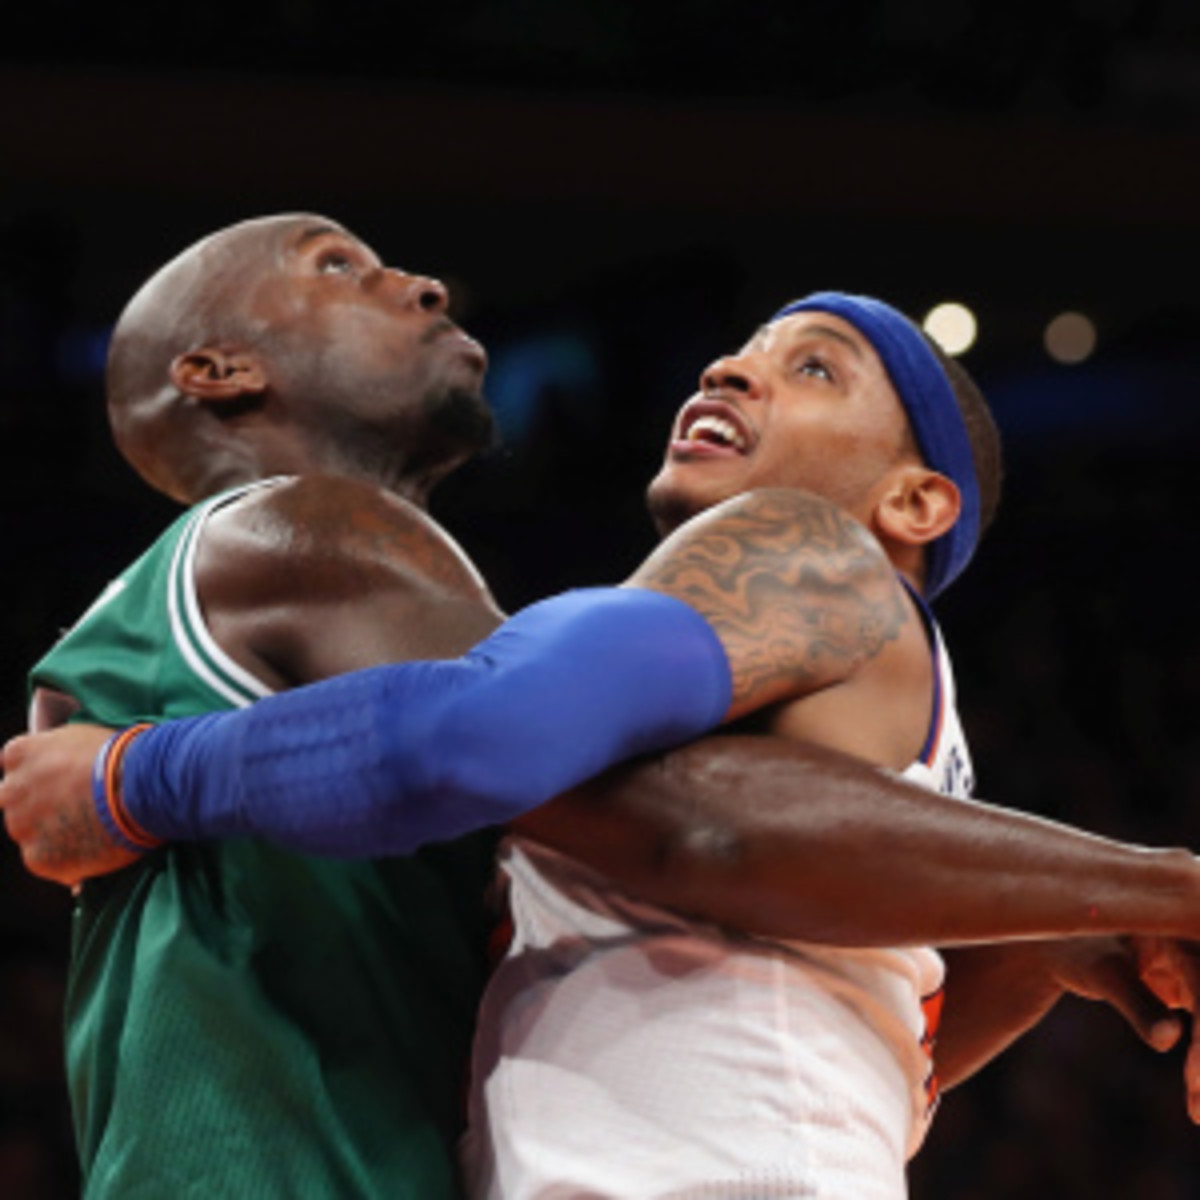 Carmelo Anthony will appeal the $176,000 he lost from a one-game suspension. (Bruce Bennett/Getty Images)